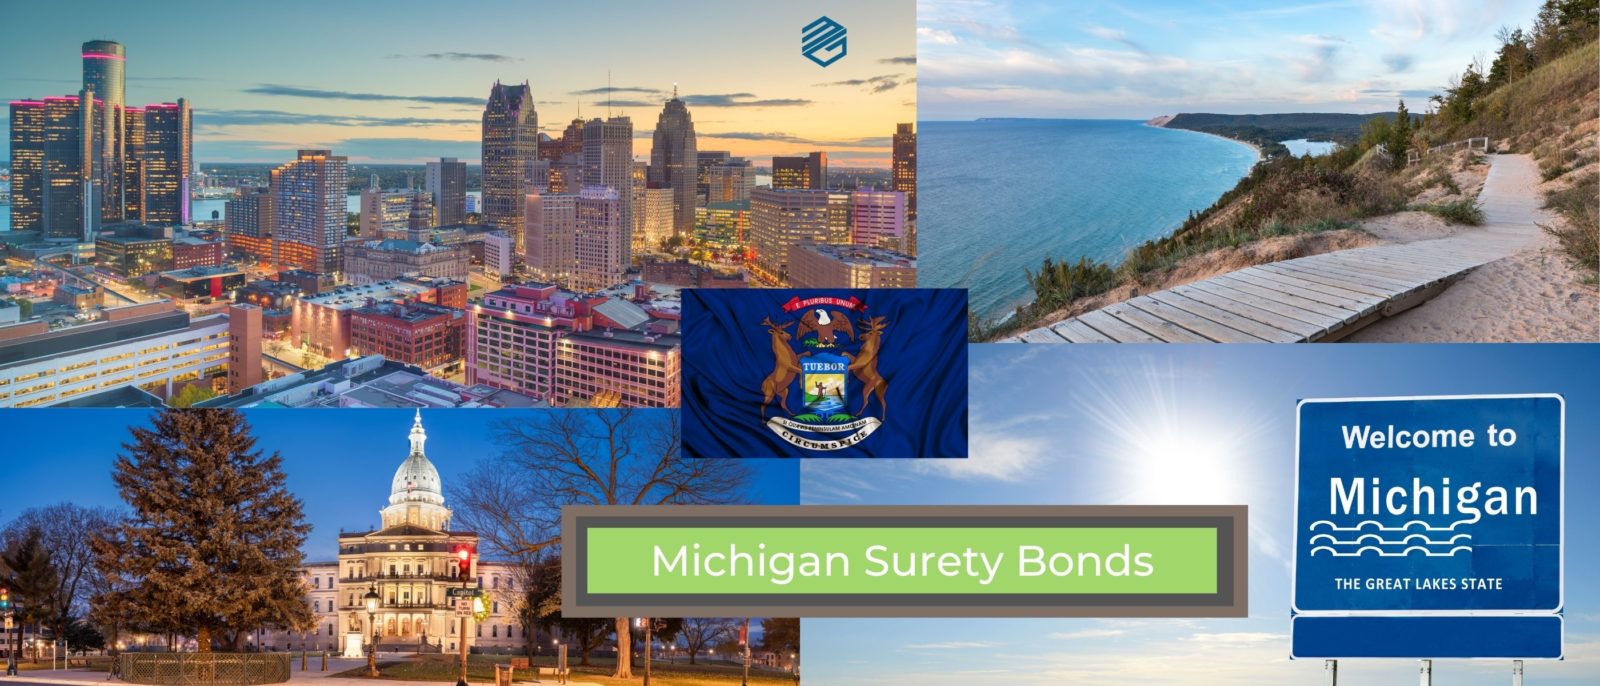 Michigan Surety Bonds - 5 pictures representing Michigan including the state flag, Detroit, Lansing, Lake Michigan and a Welcome to Michigan sign. A text box reads, "Michigan Surety Bond".